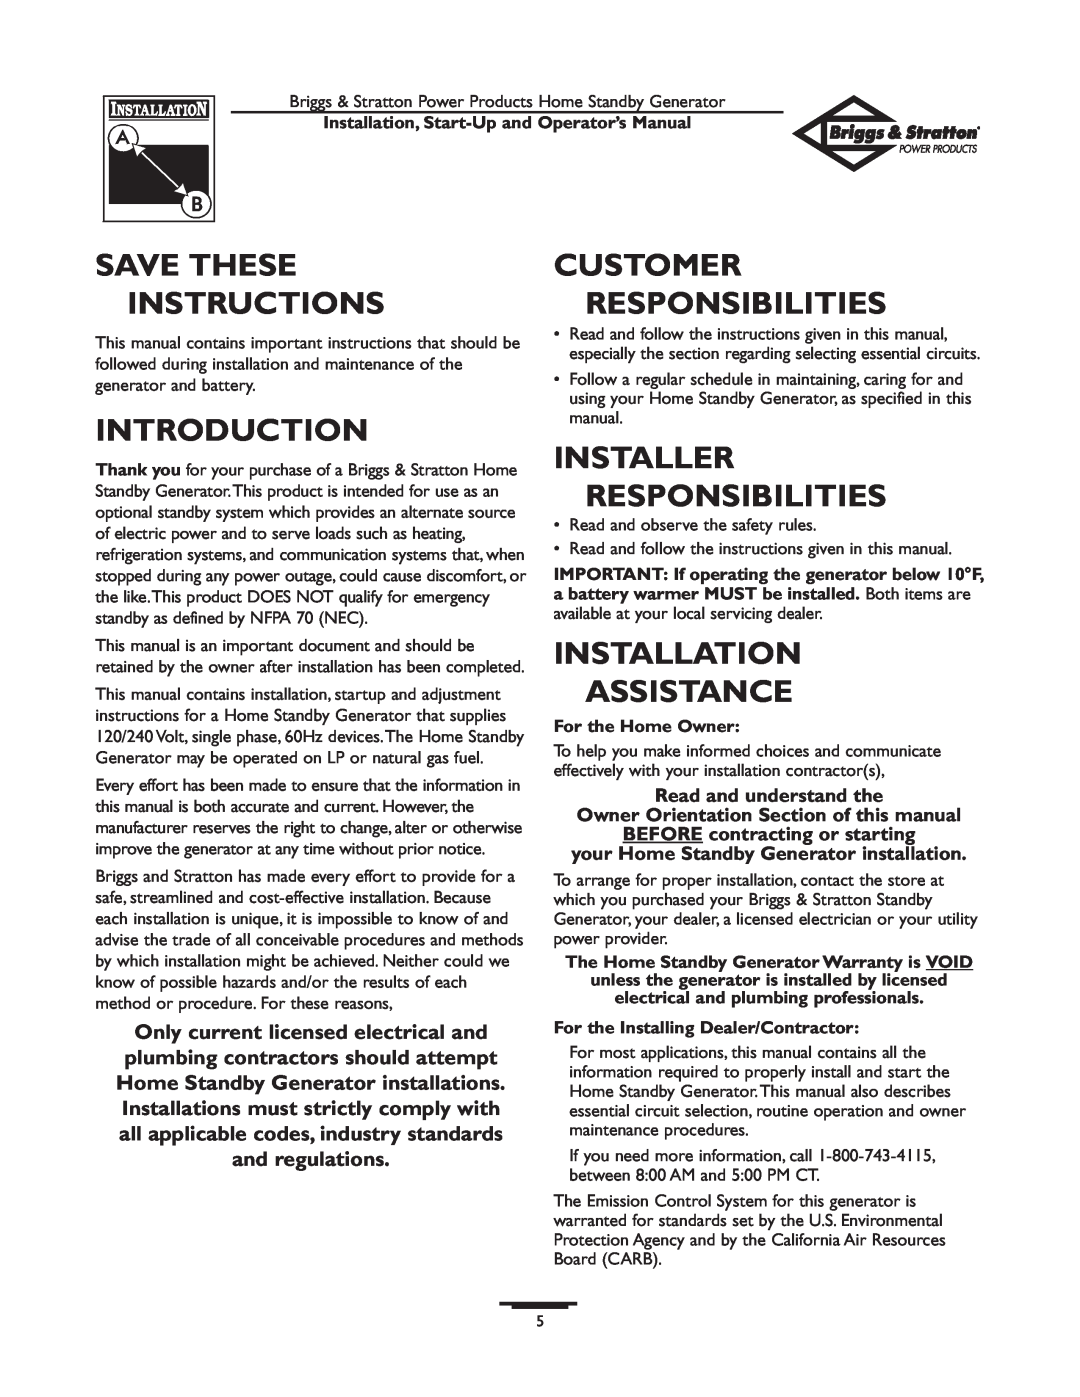 Briggs & Stratton 01897-0 manual Save These, Customer, Instructions, Introduction, Installer Responsibilities 